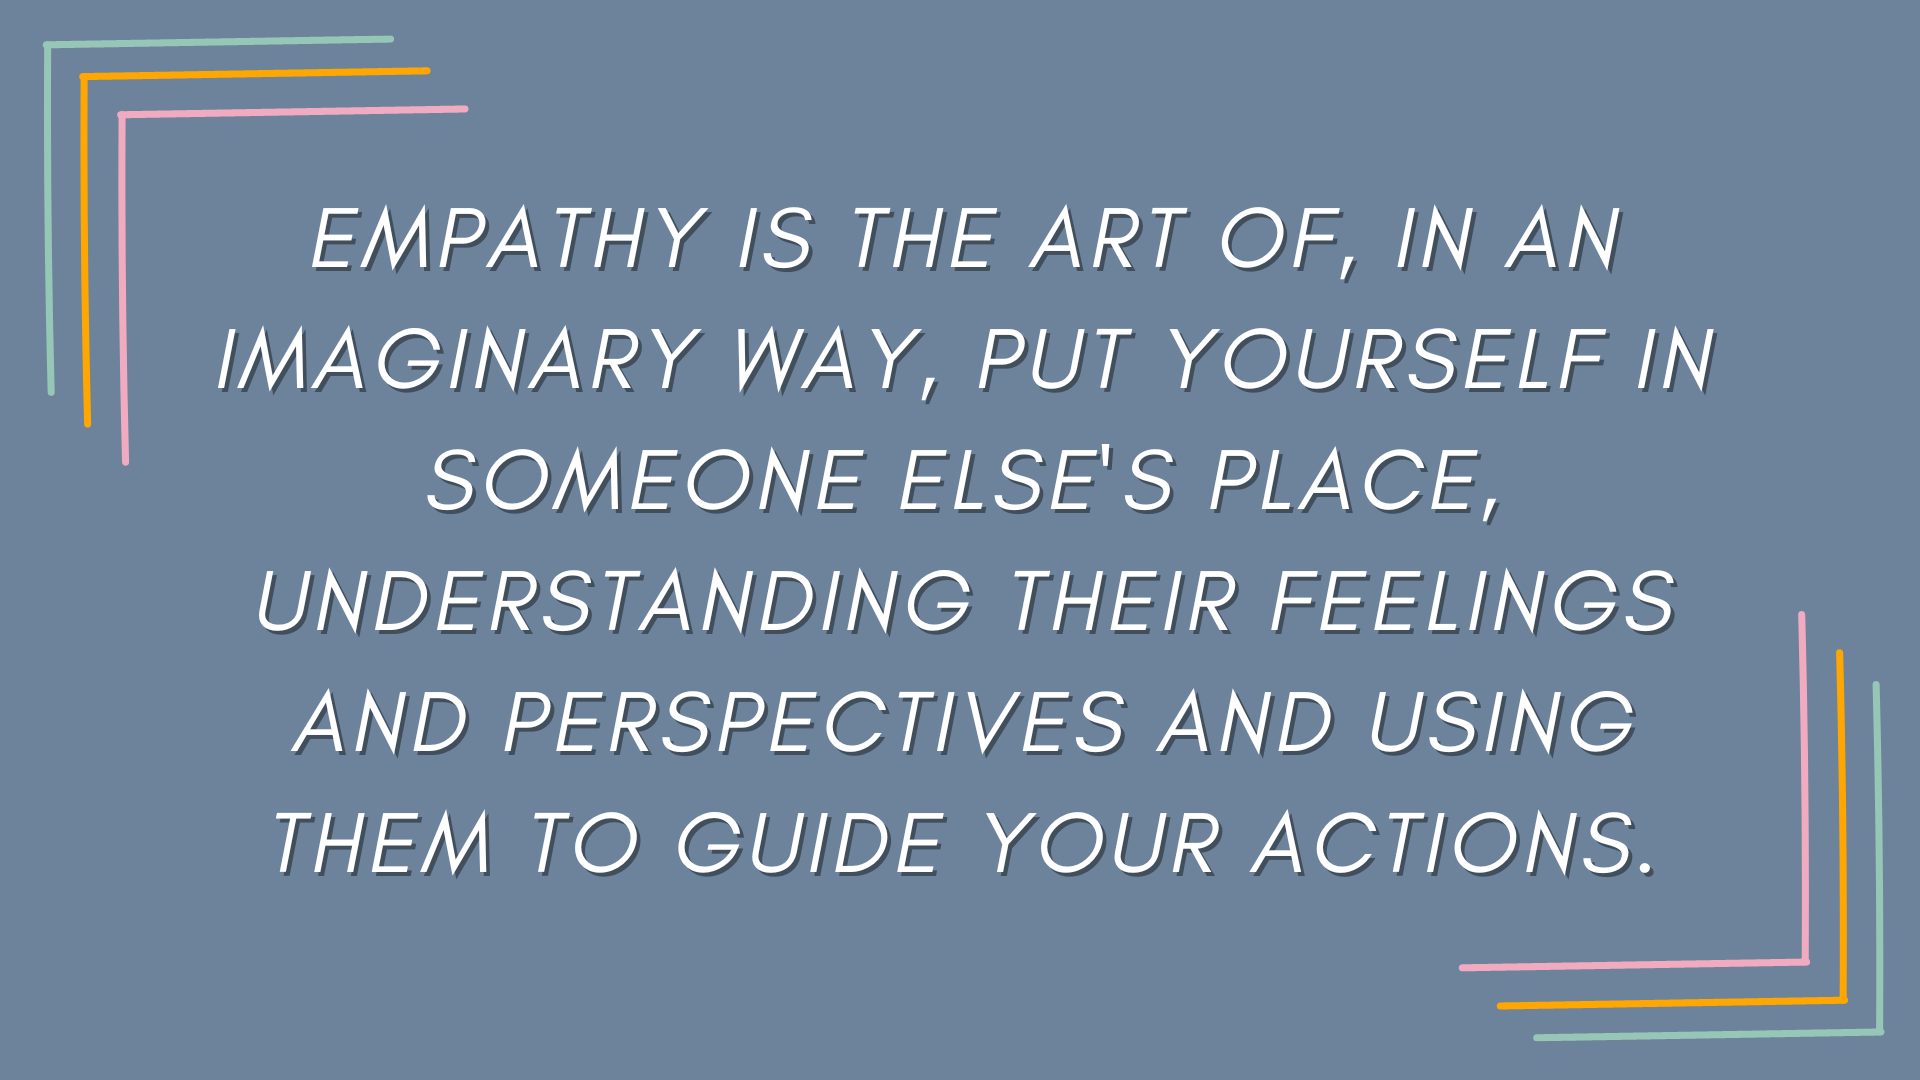 A slide that says: 'Empathy is the art of, in an imaginary way, put yourself in someone else's place, understanding their feelings and perspectives and using them to guide your actions.